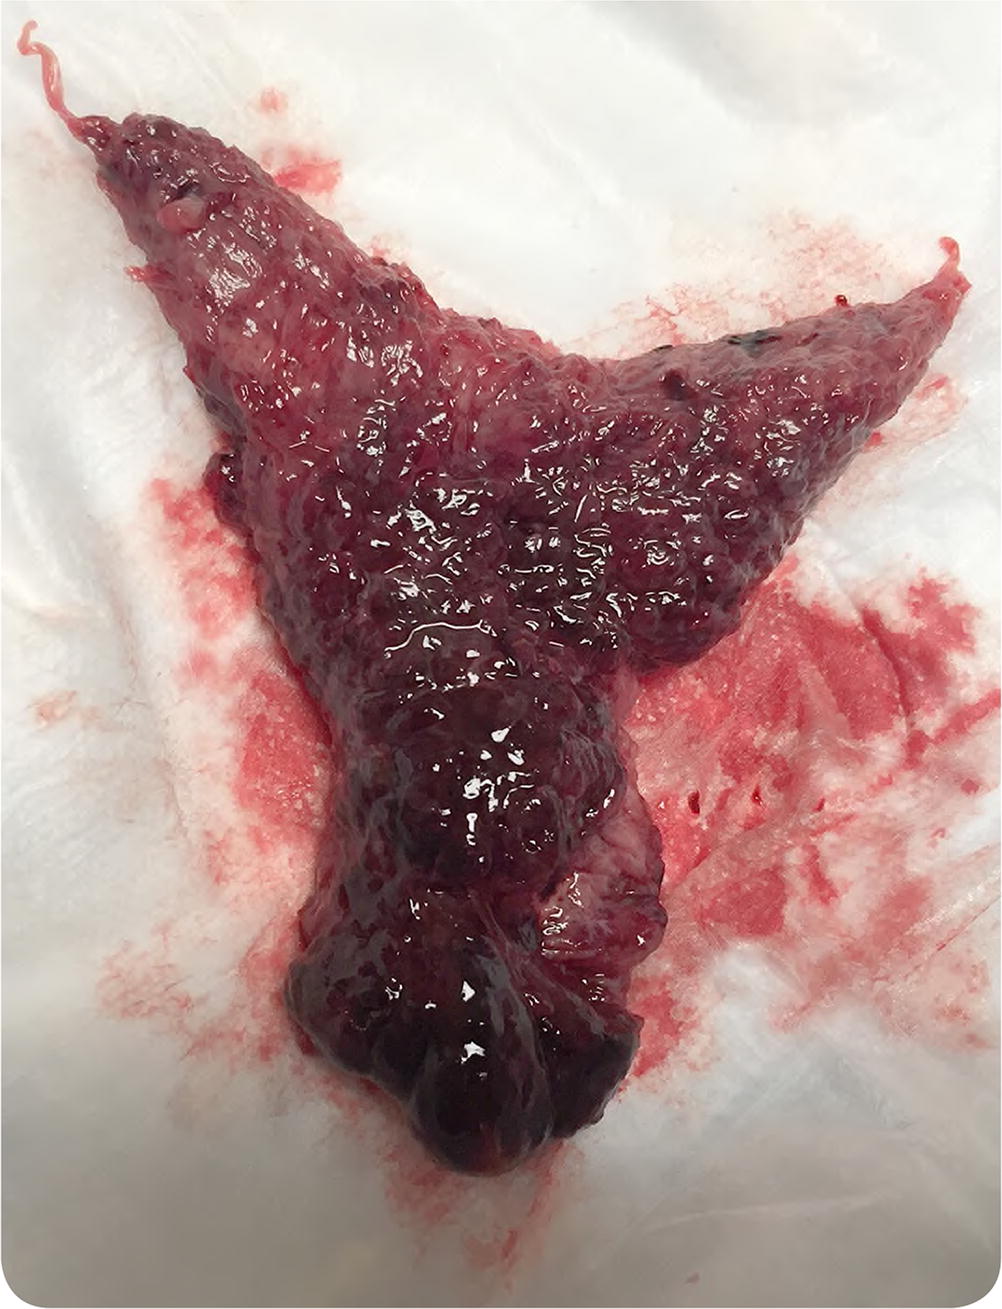 The tissue from Case 1, open and showing blood clots and endometrium